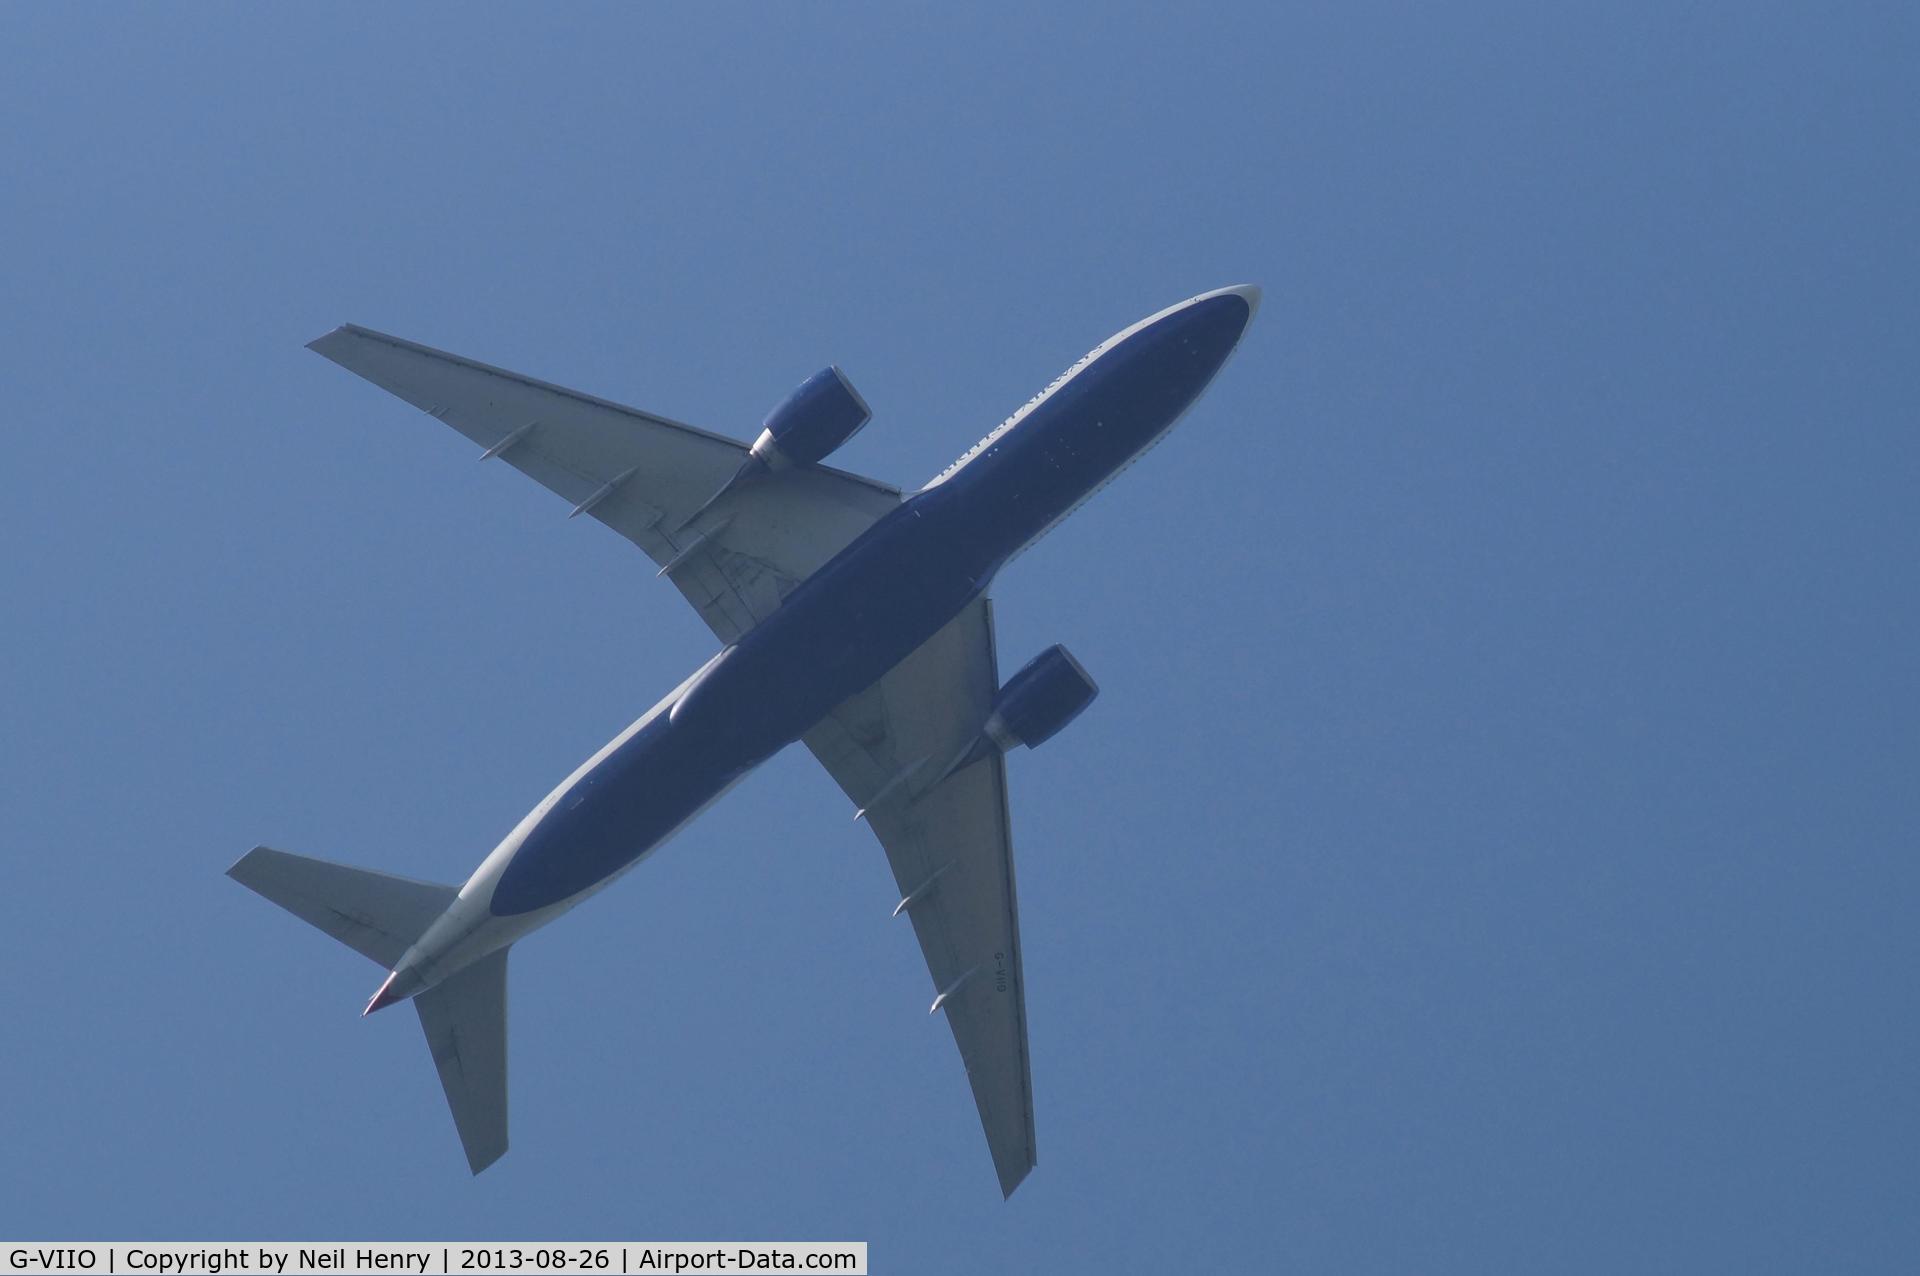 G-VIIO, 1999 Boeing 777-236 C/N 29320, Climbing after take-off eastwards from LGW - over Blindley Heath, Surrey, UK